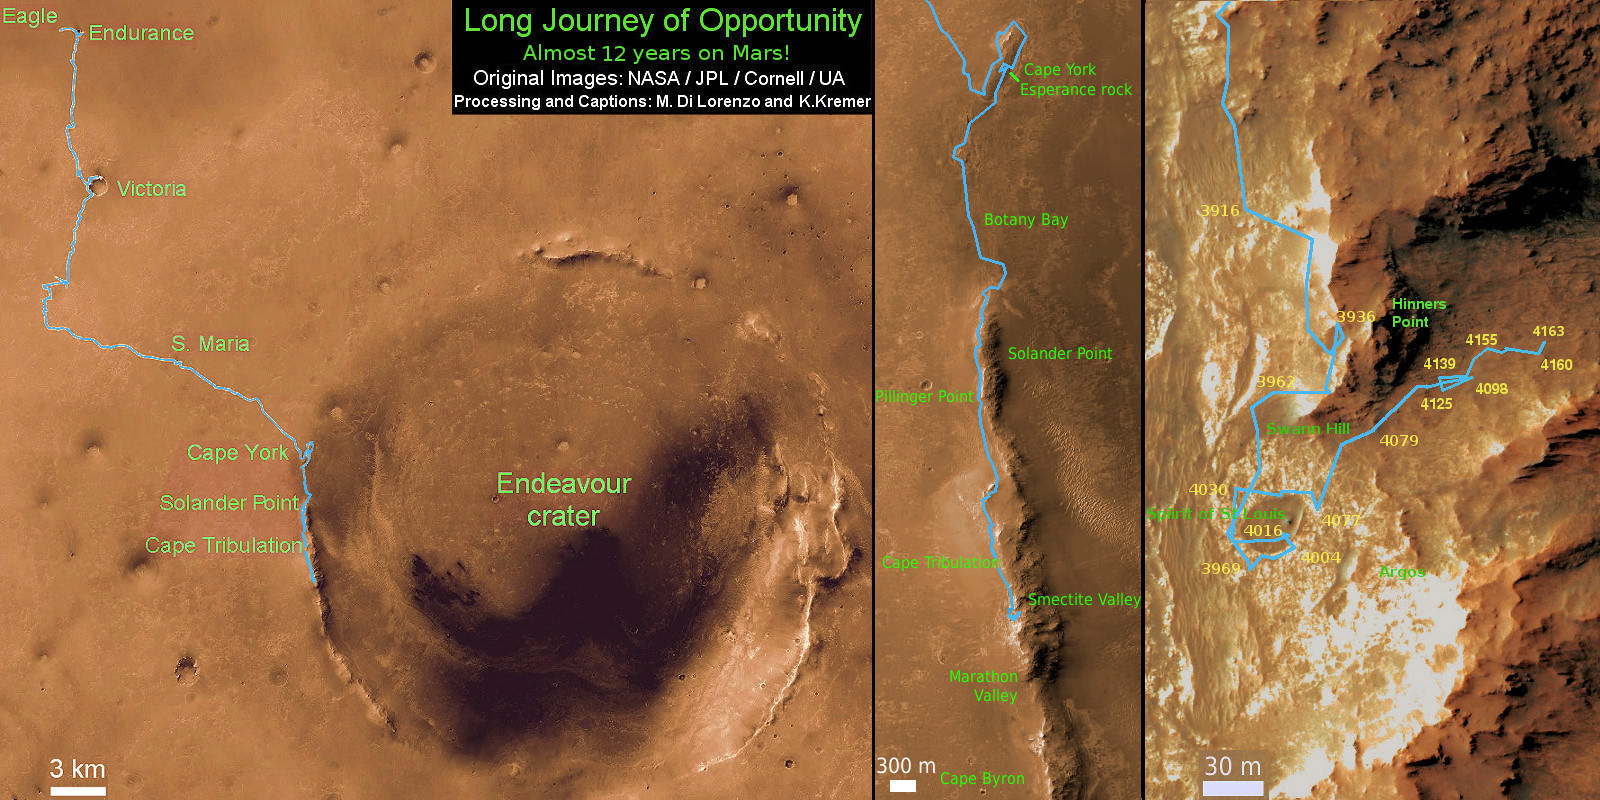 Nearly 12 Year Traverse Map for NASA’s Opportunity rover from 2004 to 2015. This map shows the entire path the rover has driven during almost 12 years and more than a marathon runners distance on Mars for over 4163 Sols, or Martian days, since landing inside Eagle Crater on Jan 24, 2004 - to current location at the western rim of Endeavour Crater and descending into Marathon Valley. Rover surpassed Marathon distance on Sol 3968 and marked 11th Martian anniversary on Sol 3911. Opportunity discovered clay minerals at Esperance – indicative of a habitable zone - and is currently searching for more at Marathon Valley.  Credit: NASA/JPL/Cornell/ASU/Marco Di Lorenzo/Ken Kremer/kenkremer.com